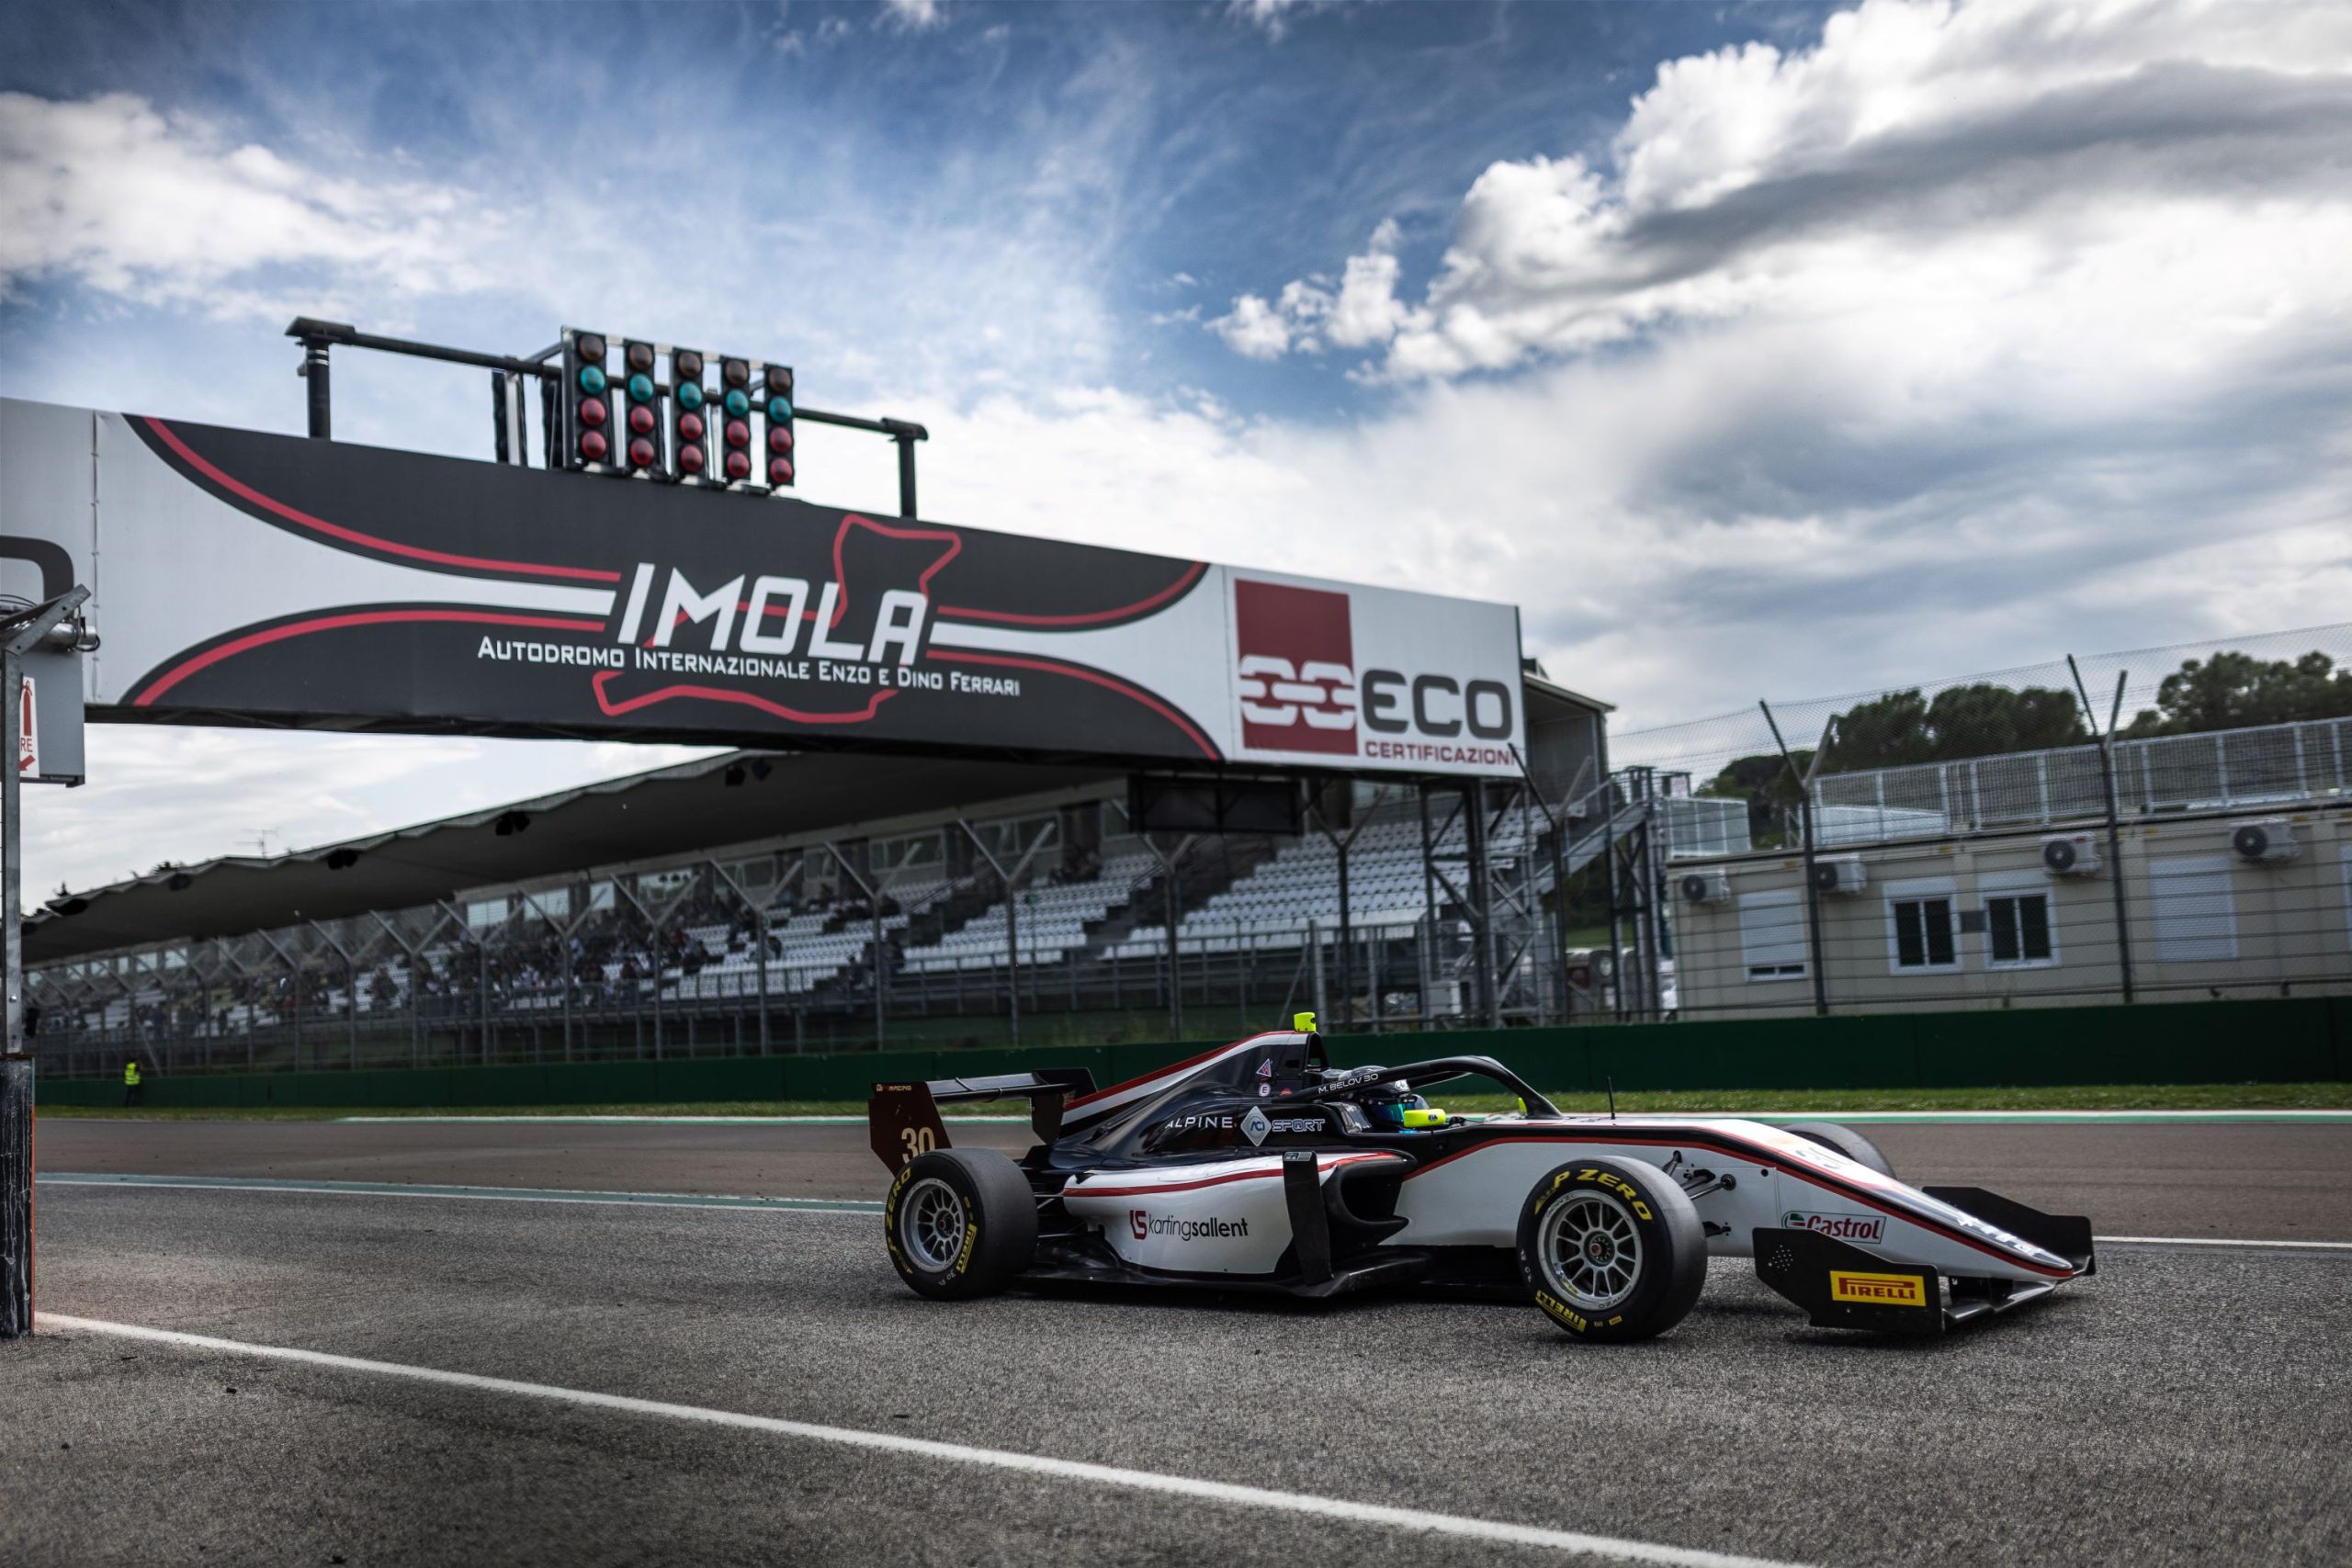 G4 Racing first points in 2023 season at Imola